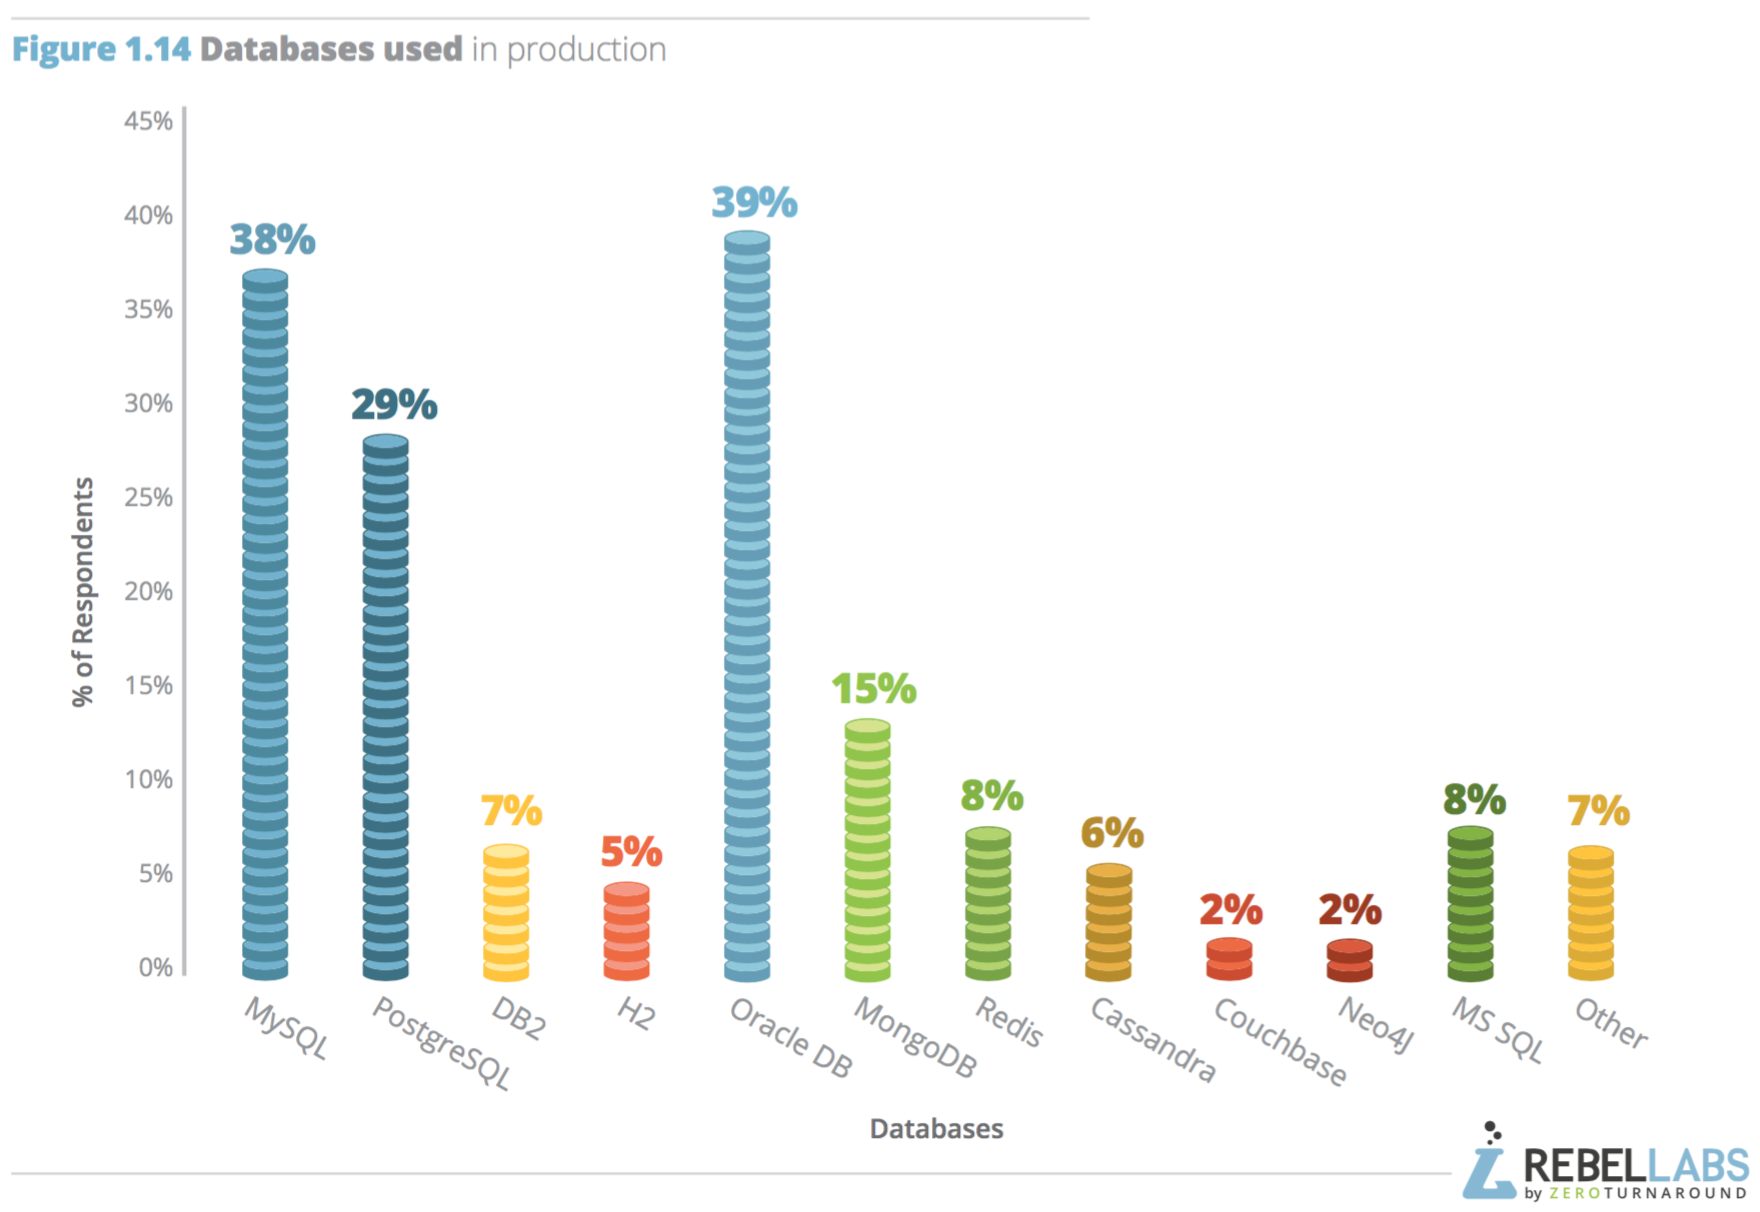 bar graph showing which databases respondents use in production